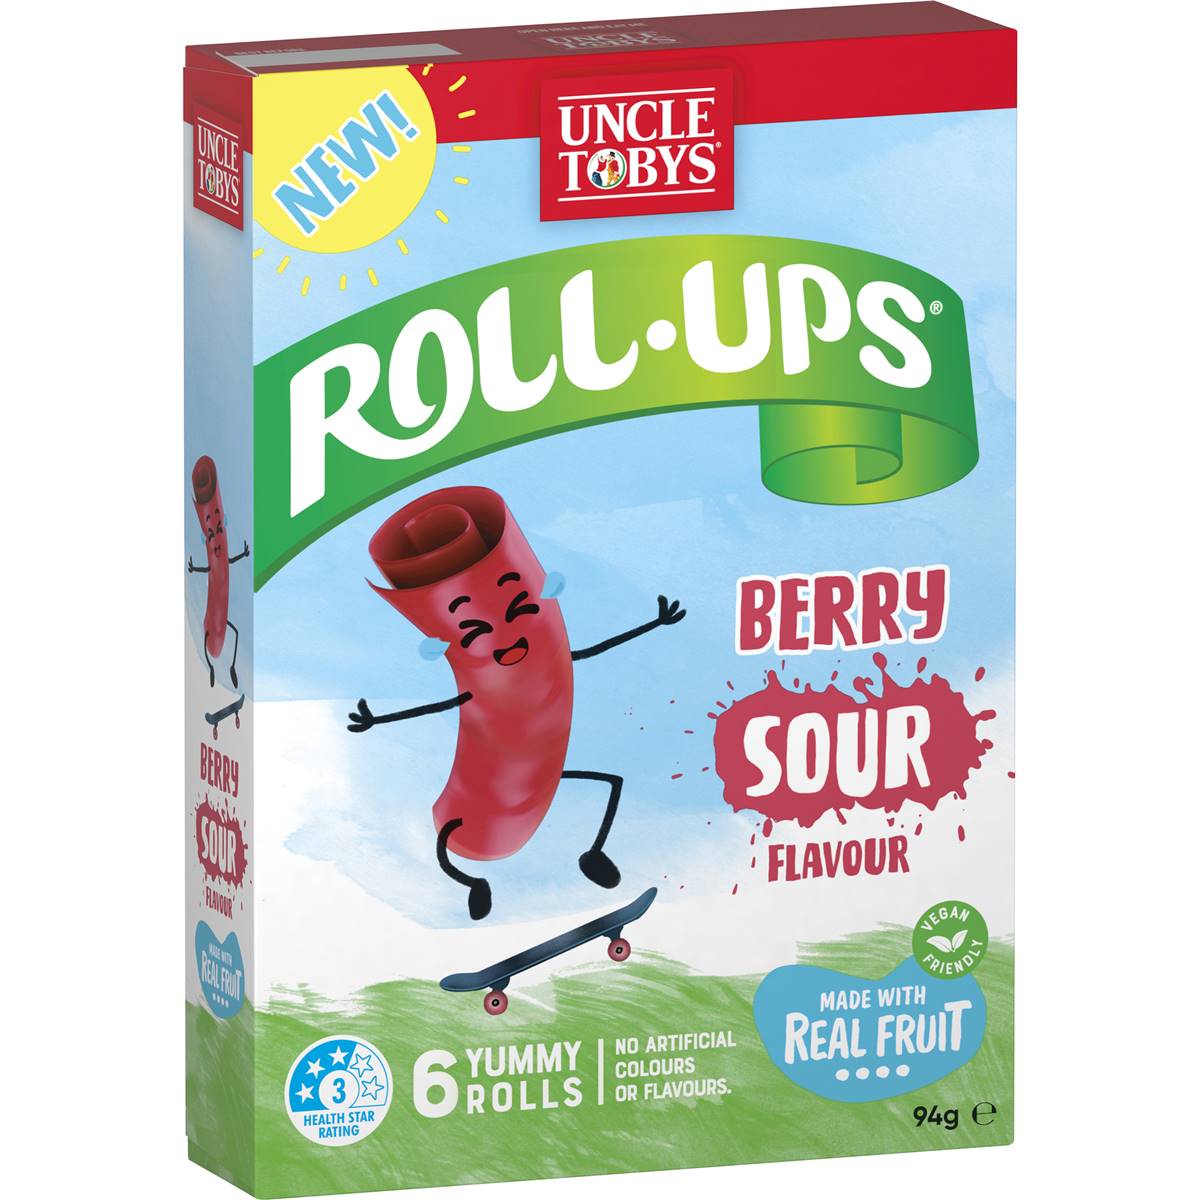 Calories in Uncle Tobys Roll Ups Berry Sour Flavour